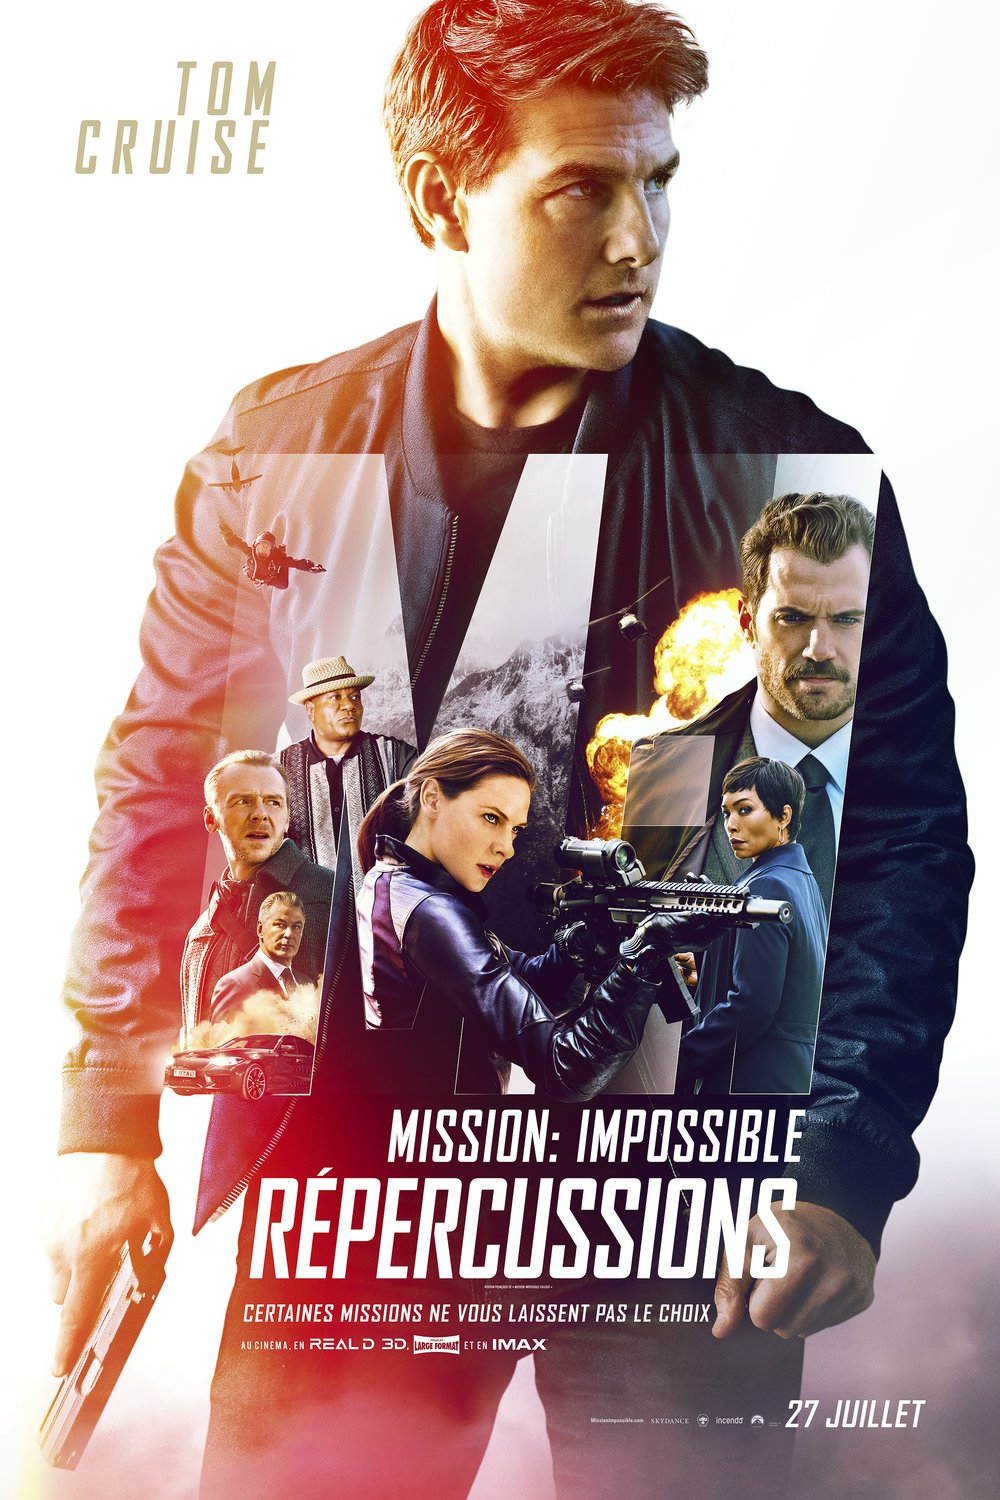 Poster of the movie Mission: Impossible - Répercussions